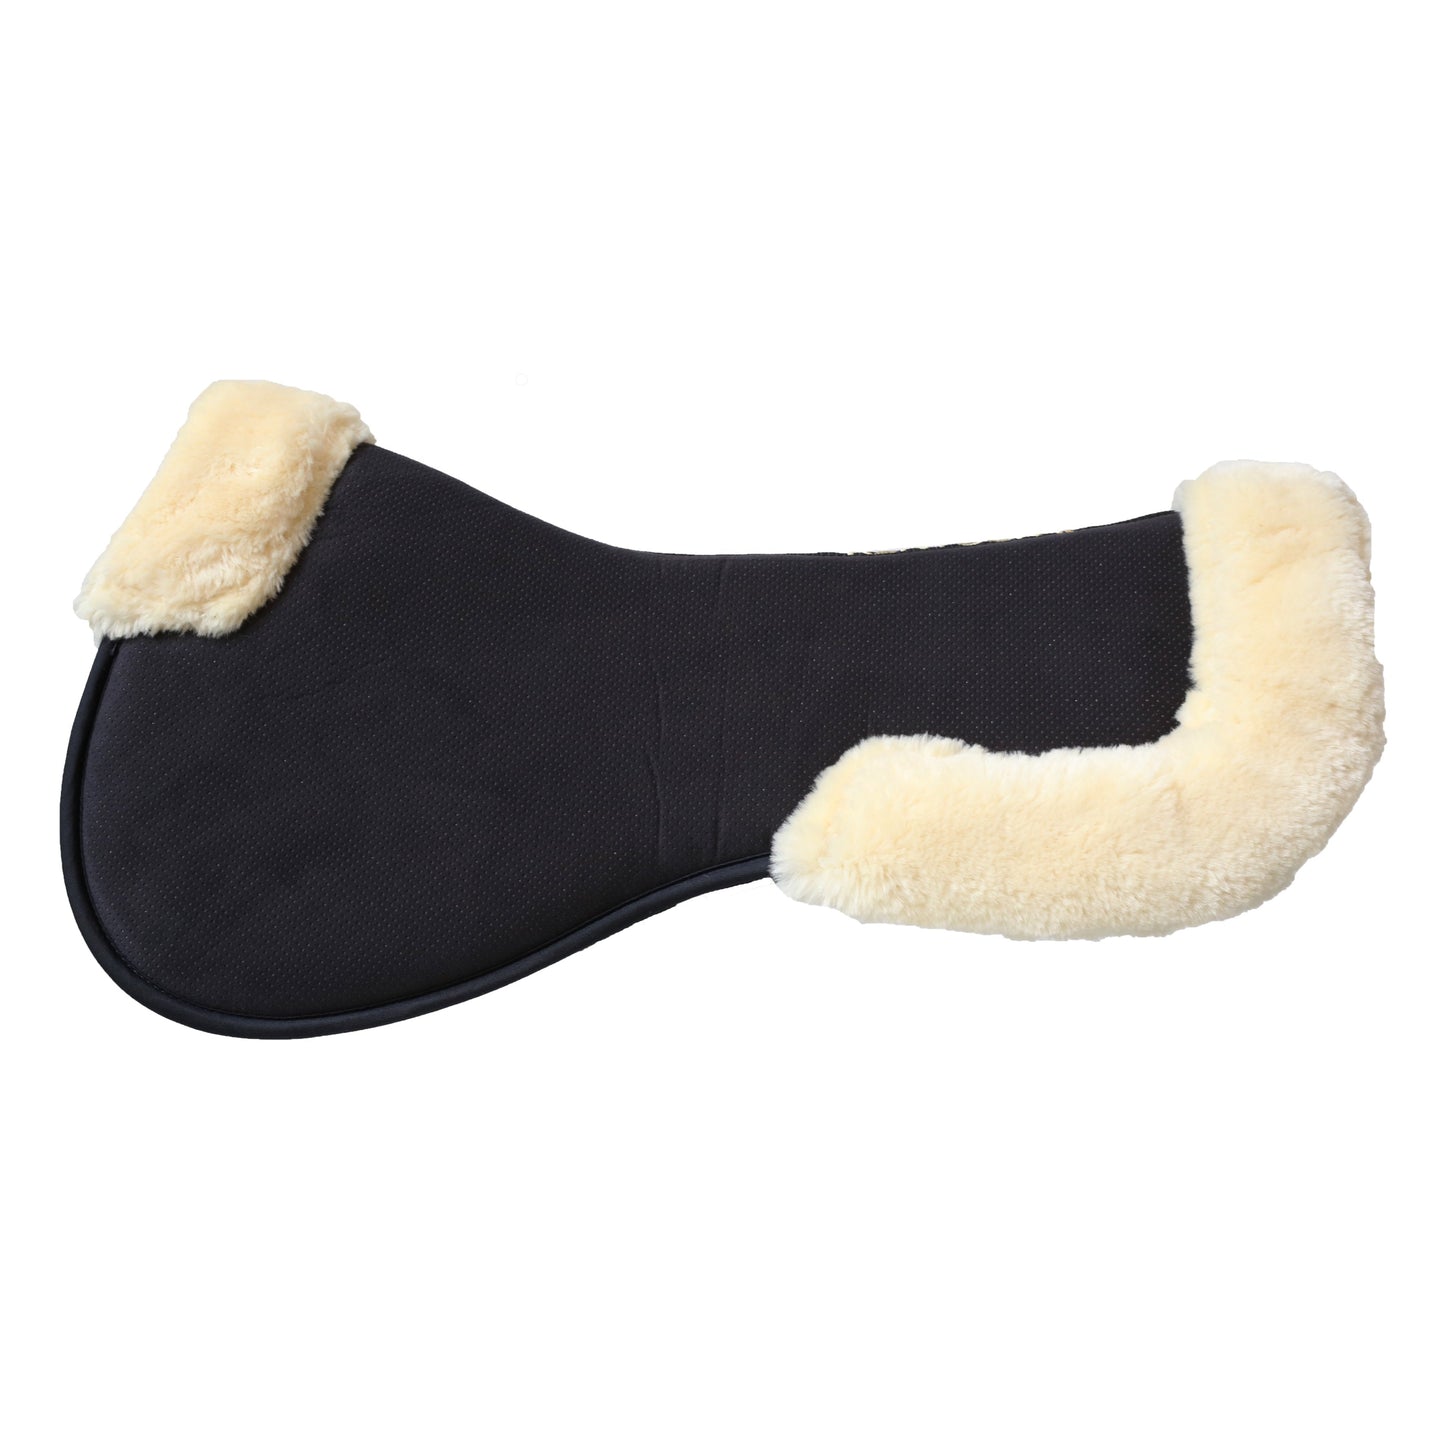 Kentucky Sheepskin Anatomic Half Pad Absorb-Trailrace Equestrian Outfitters-The Equestrian